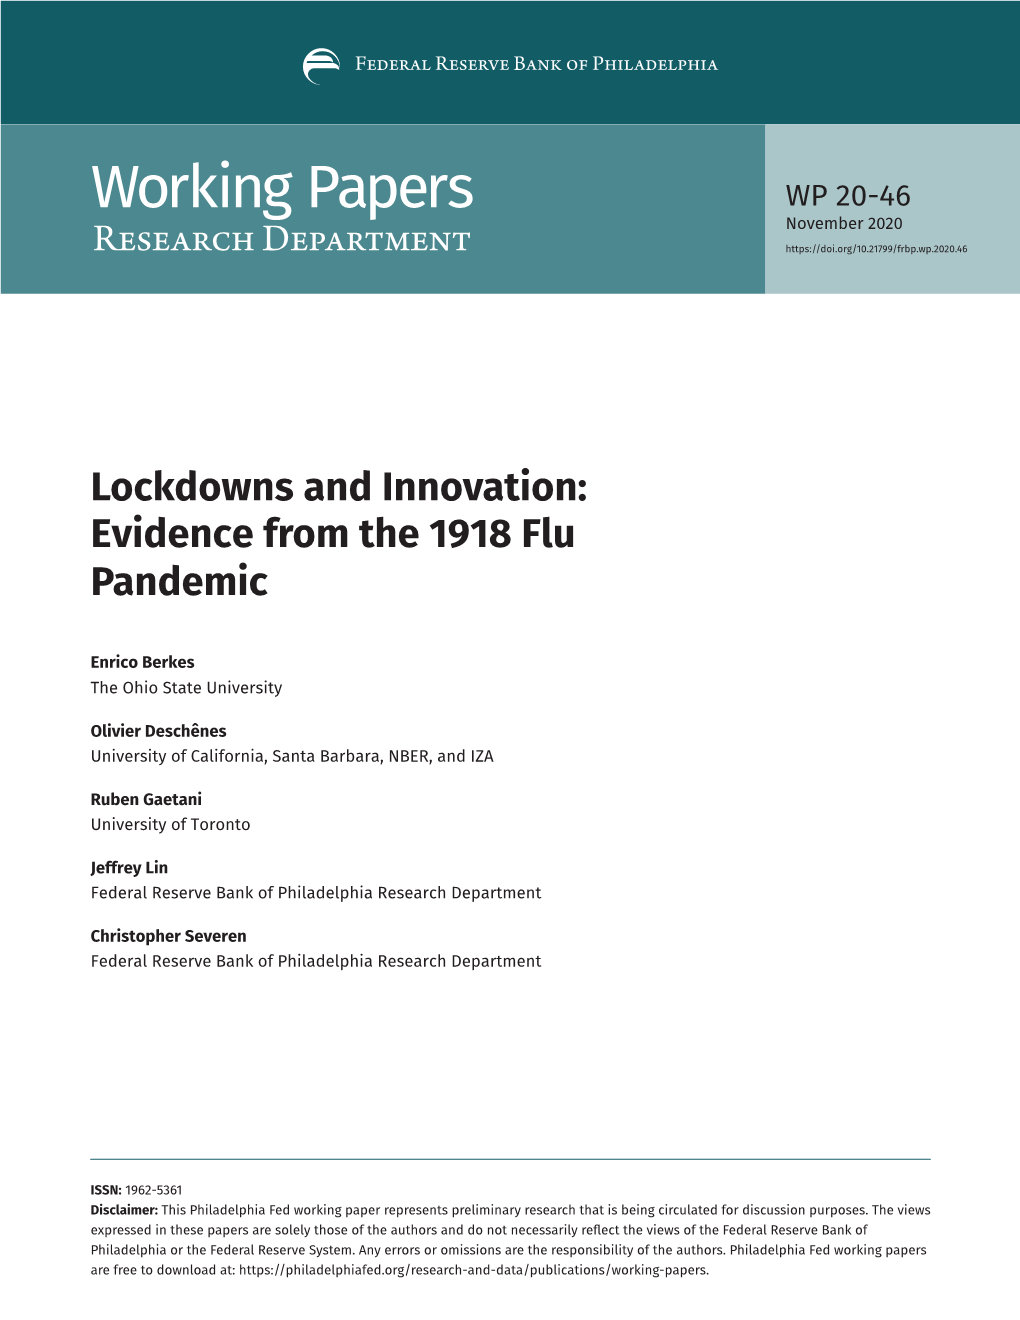 Lockdowns and Innovation: Evidence from the 1918 Flu Pandemic